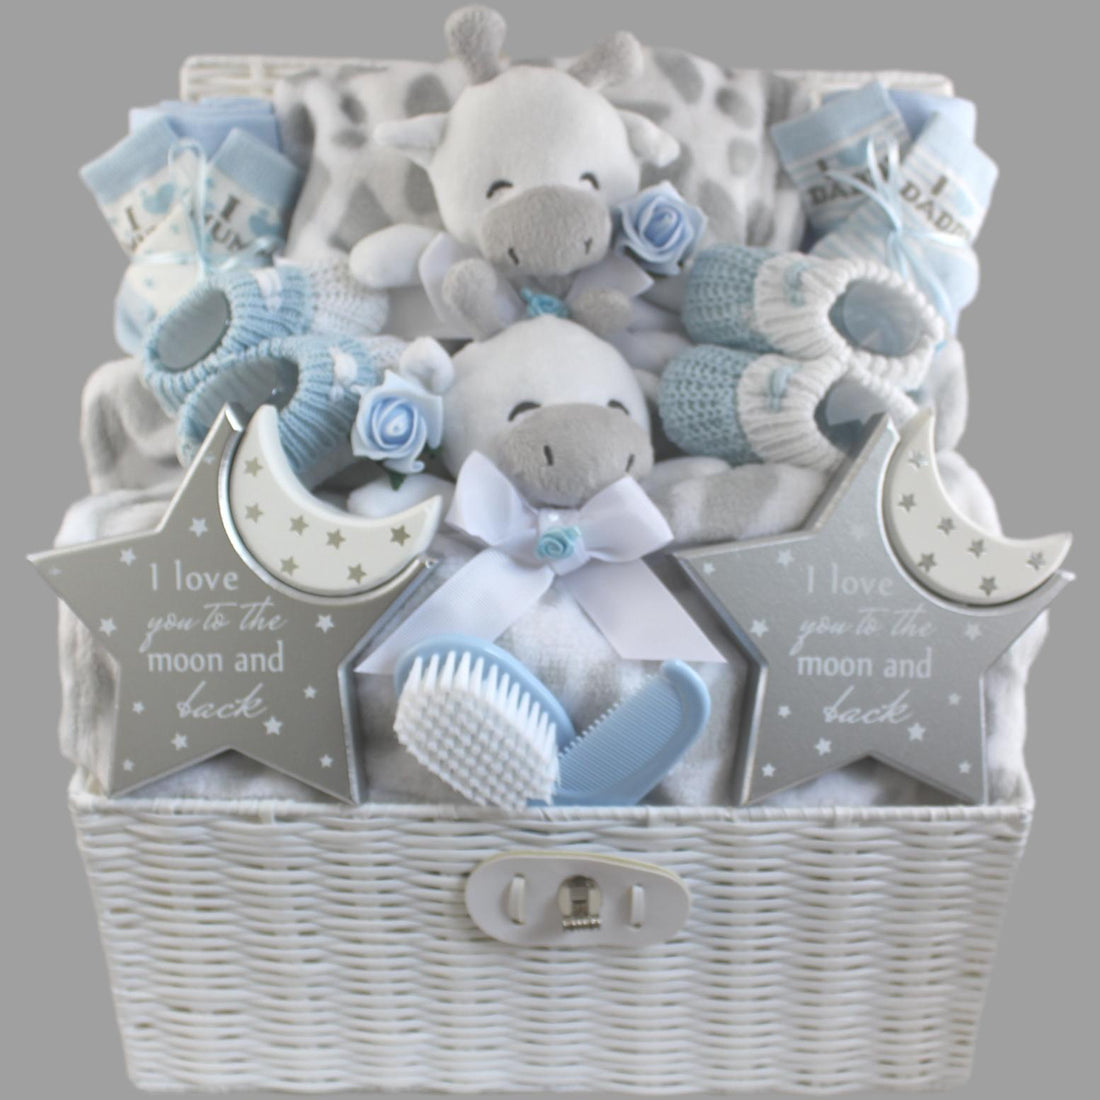 Stretchy the Giraffe Baby Gift Hampers for Twin Boys